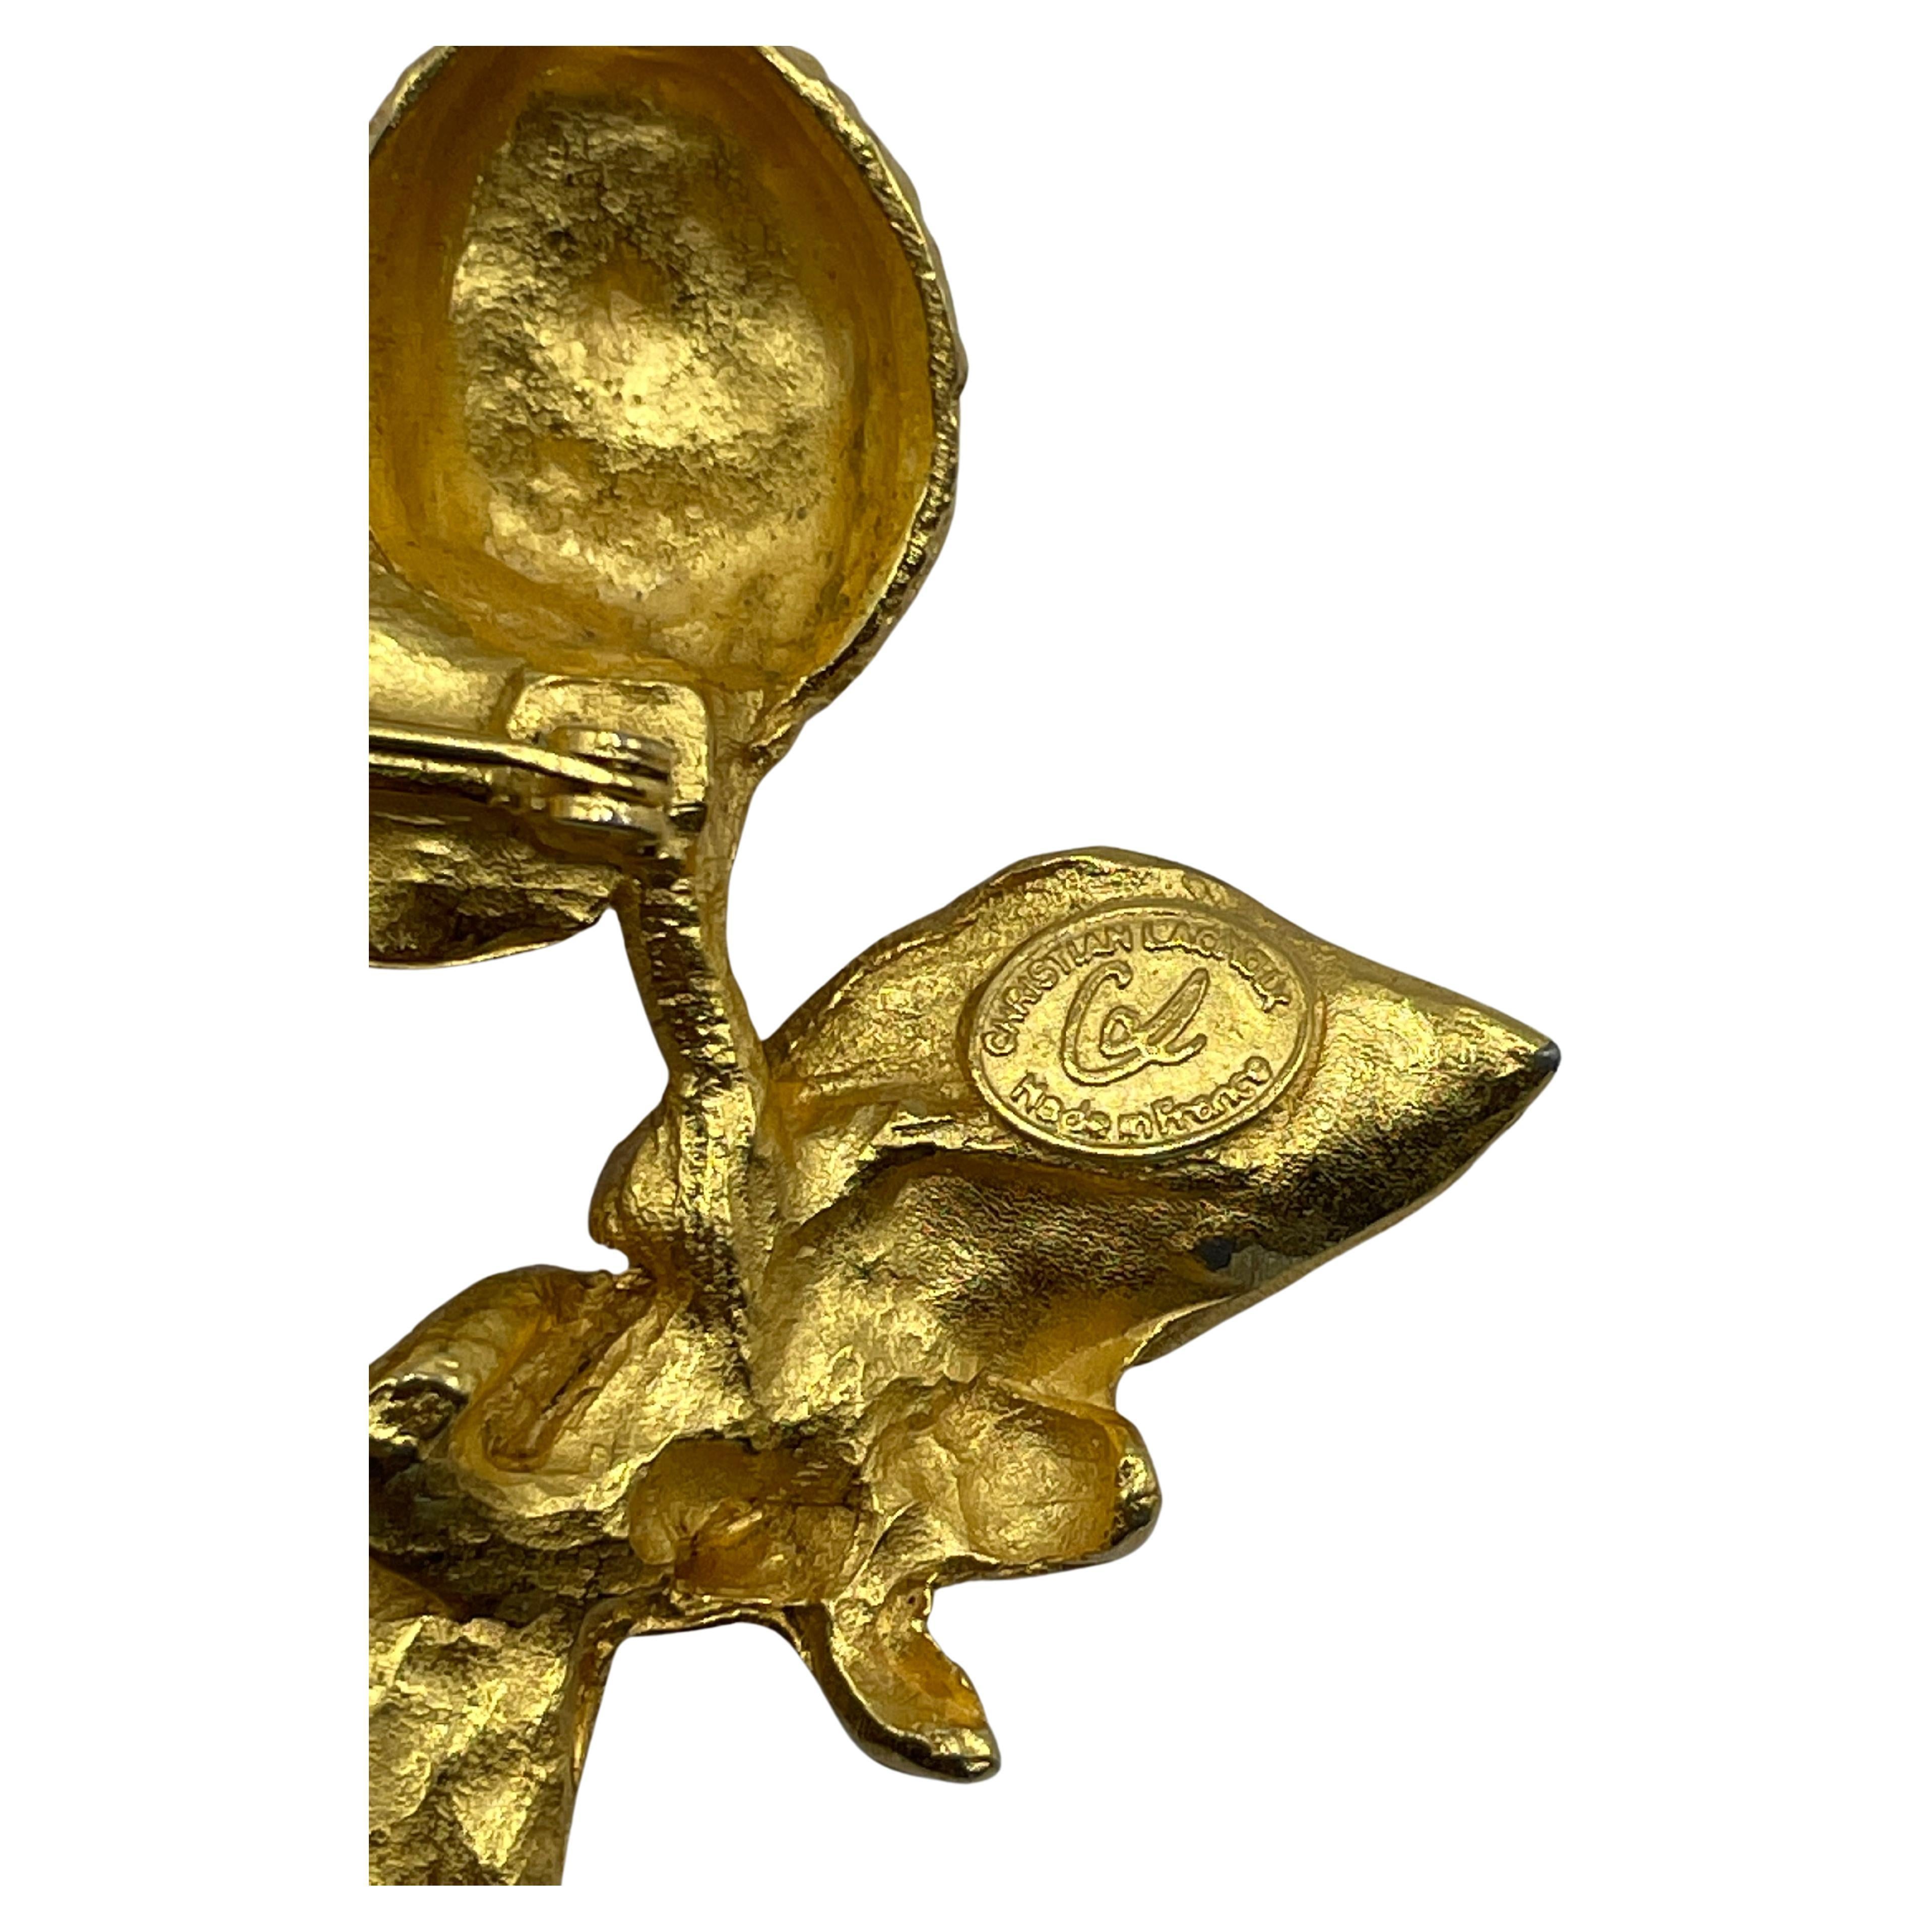 Christian Lacroix Gold-Toned Brooch. Made in France. In perfect condition and quality. With the Christian Lacroix stamp on the back. 